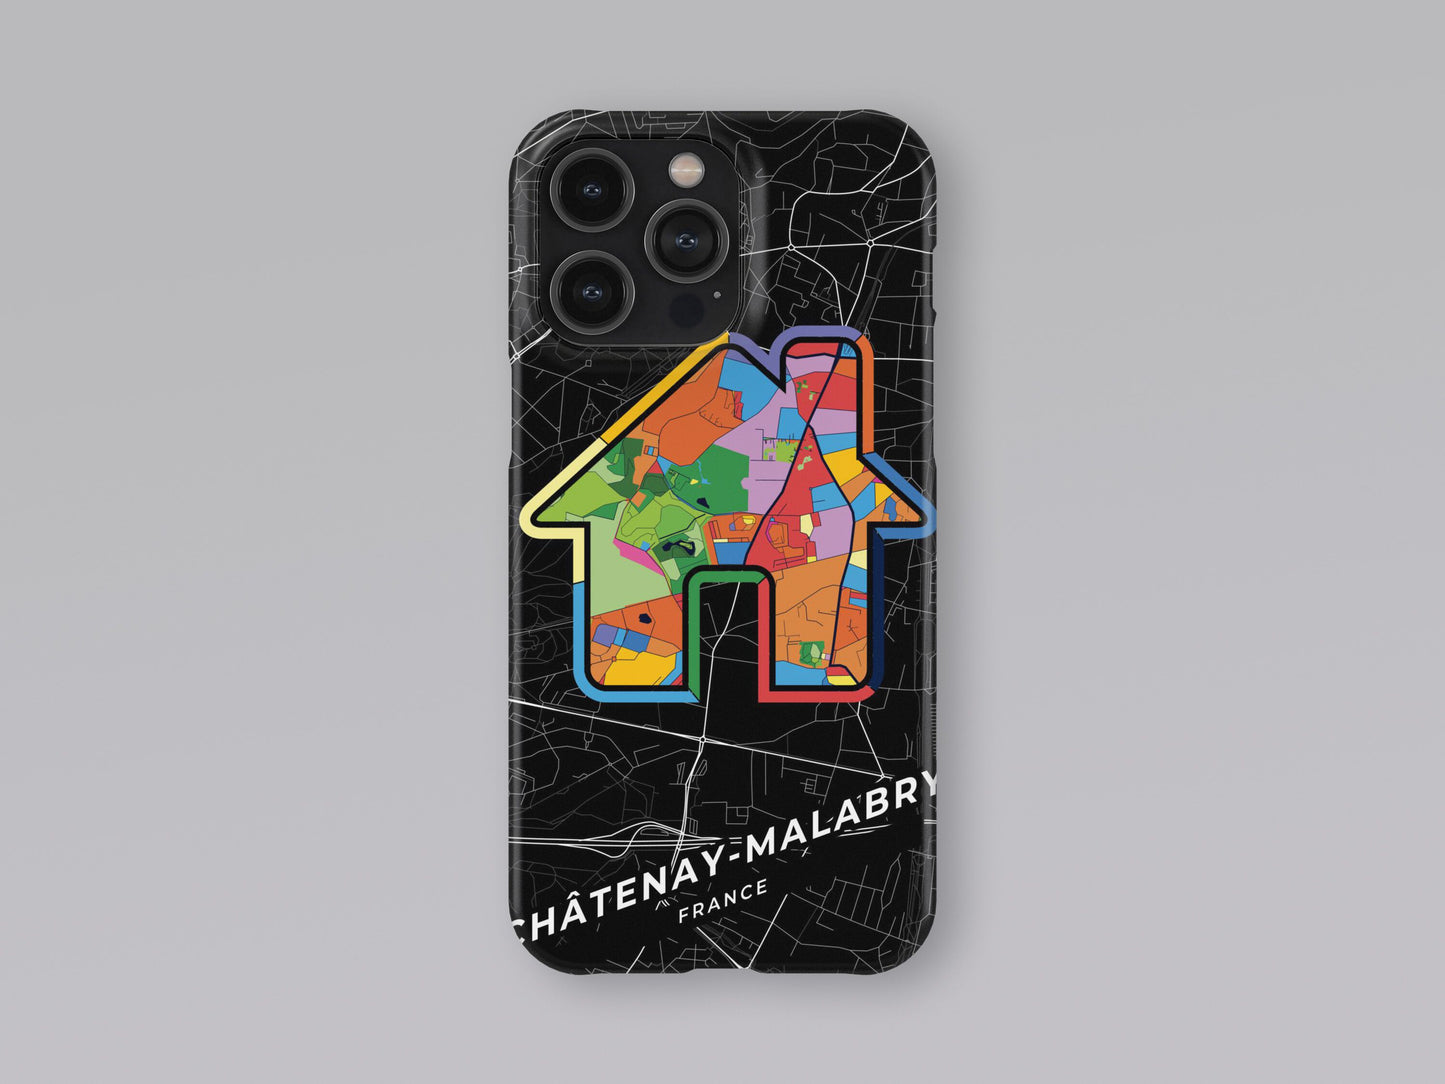 Châtenay-Malabry France slim phone case with colorful icon. Birthday, wedding or housewarming gift. Couple match cases. 3